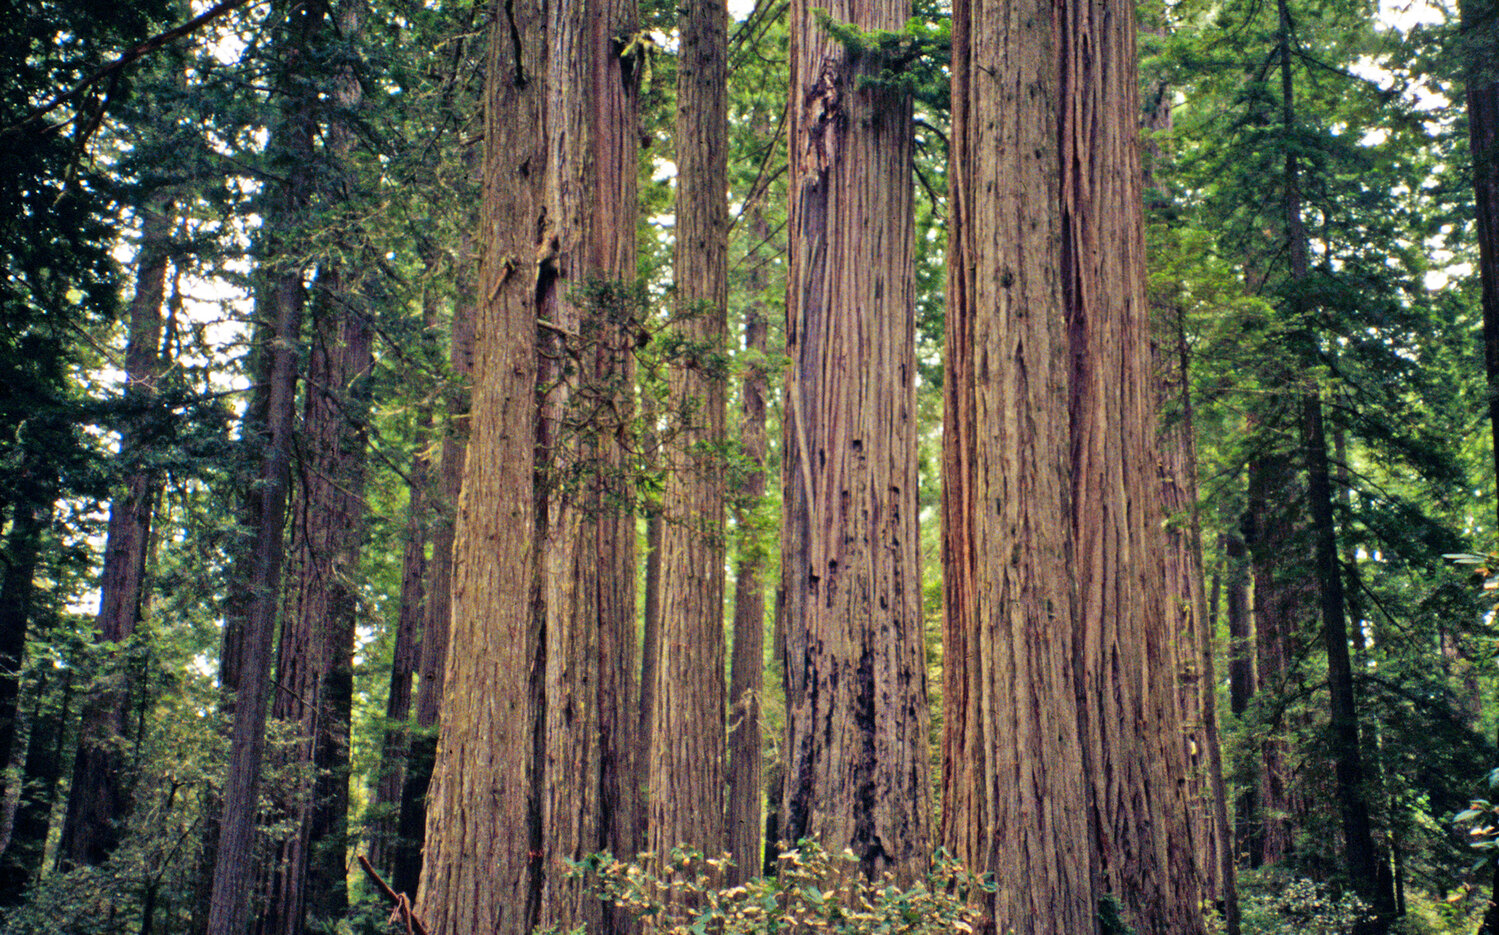 A group of coastal redwood trees (Sequoia sempervirens), one of two species designated as state trees of California.